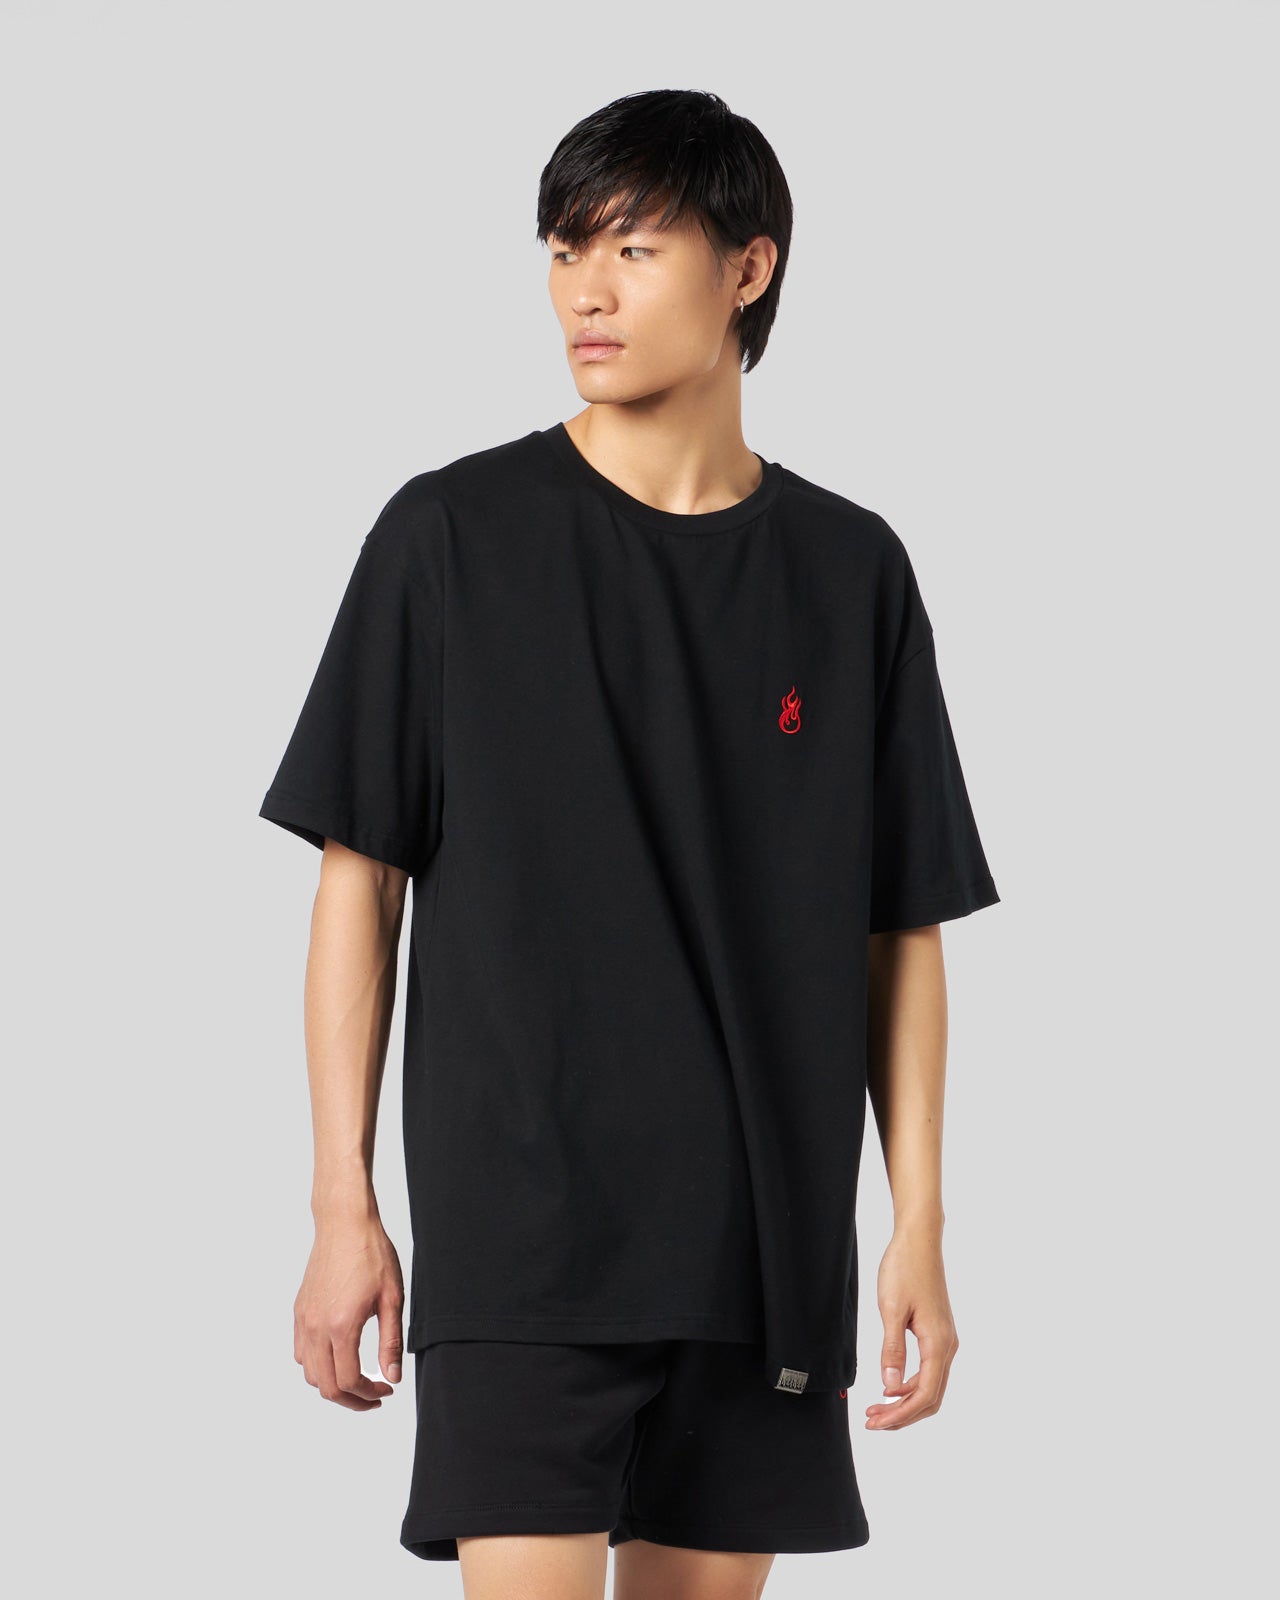 BLACK T-SHIRT WITH FLAMES LOGO